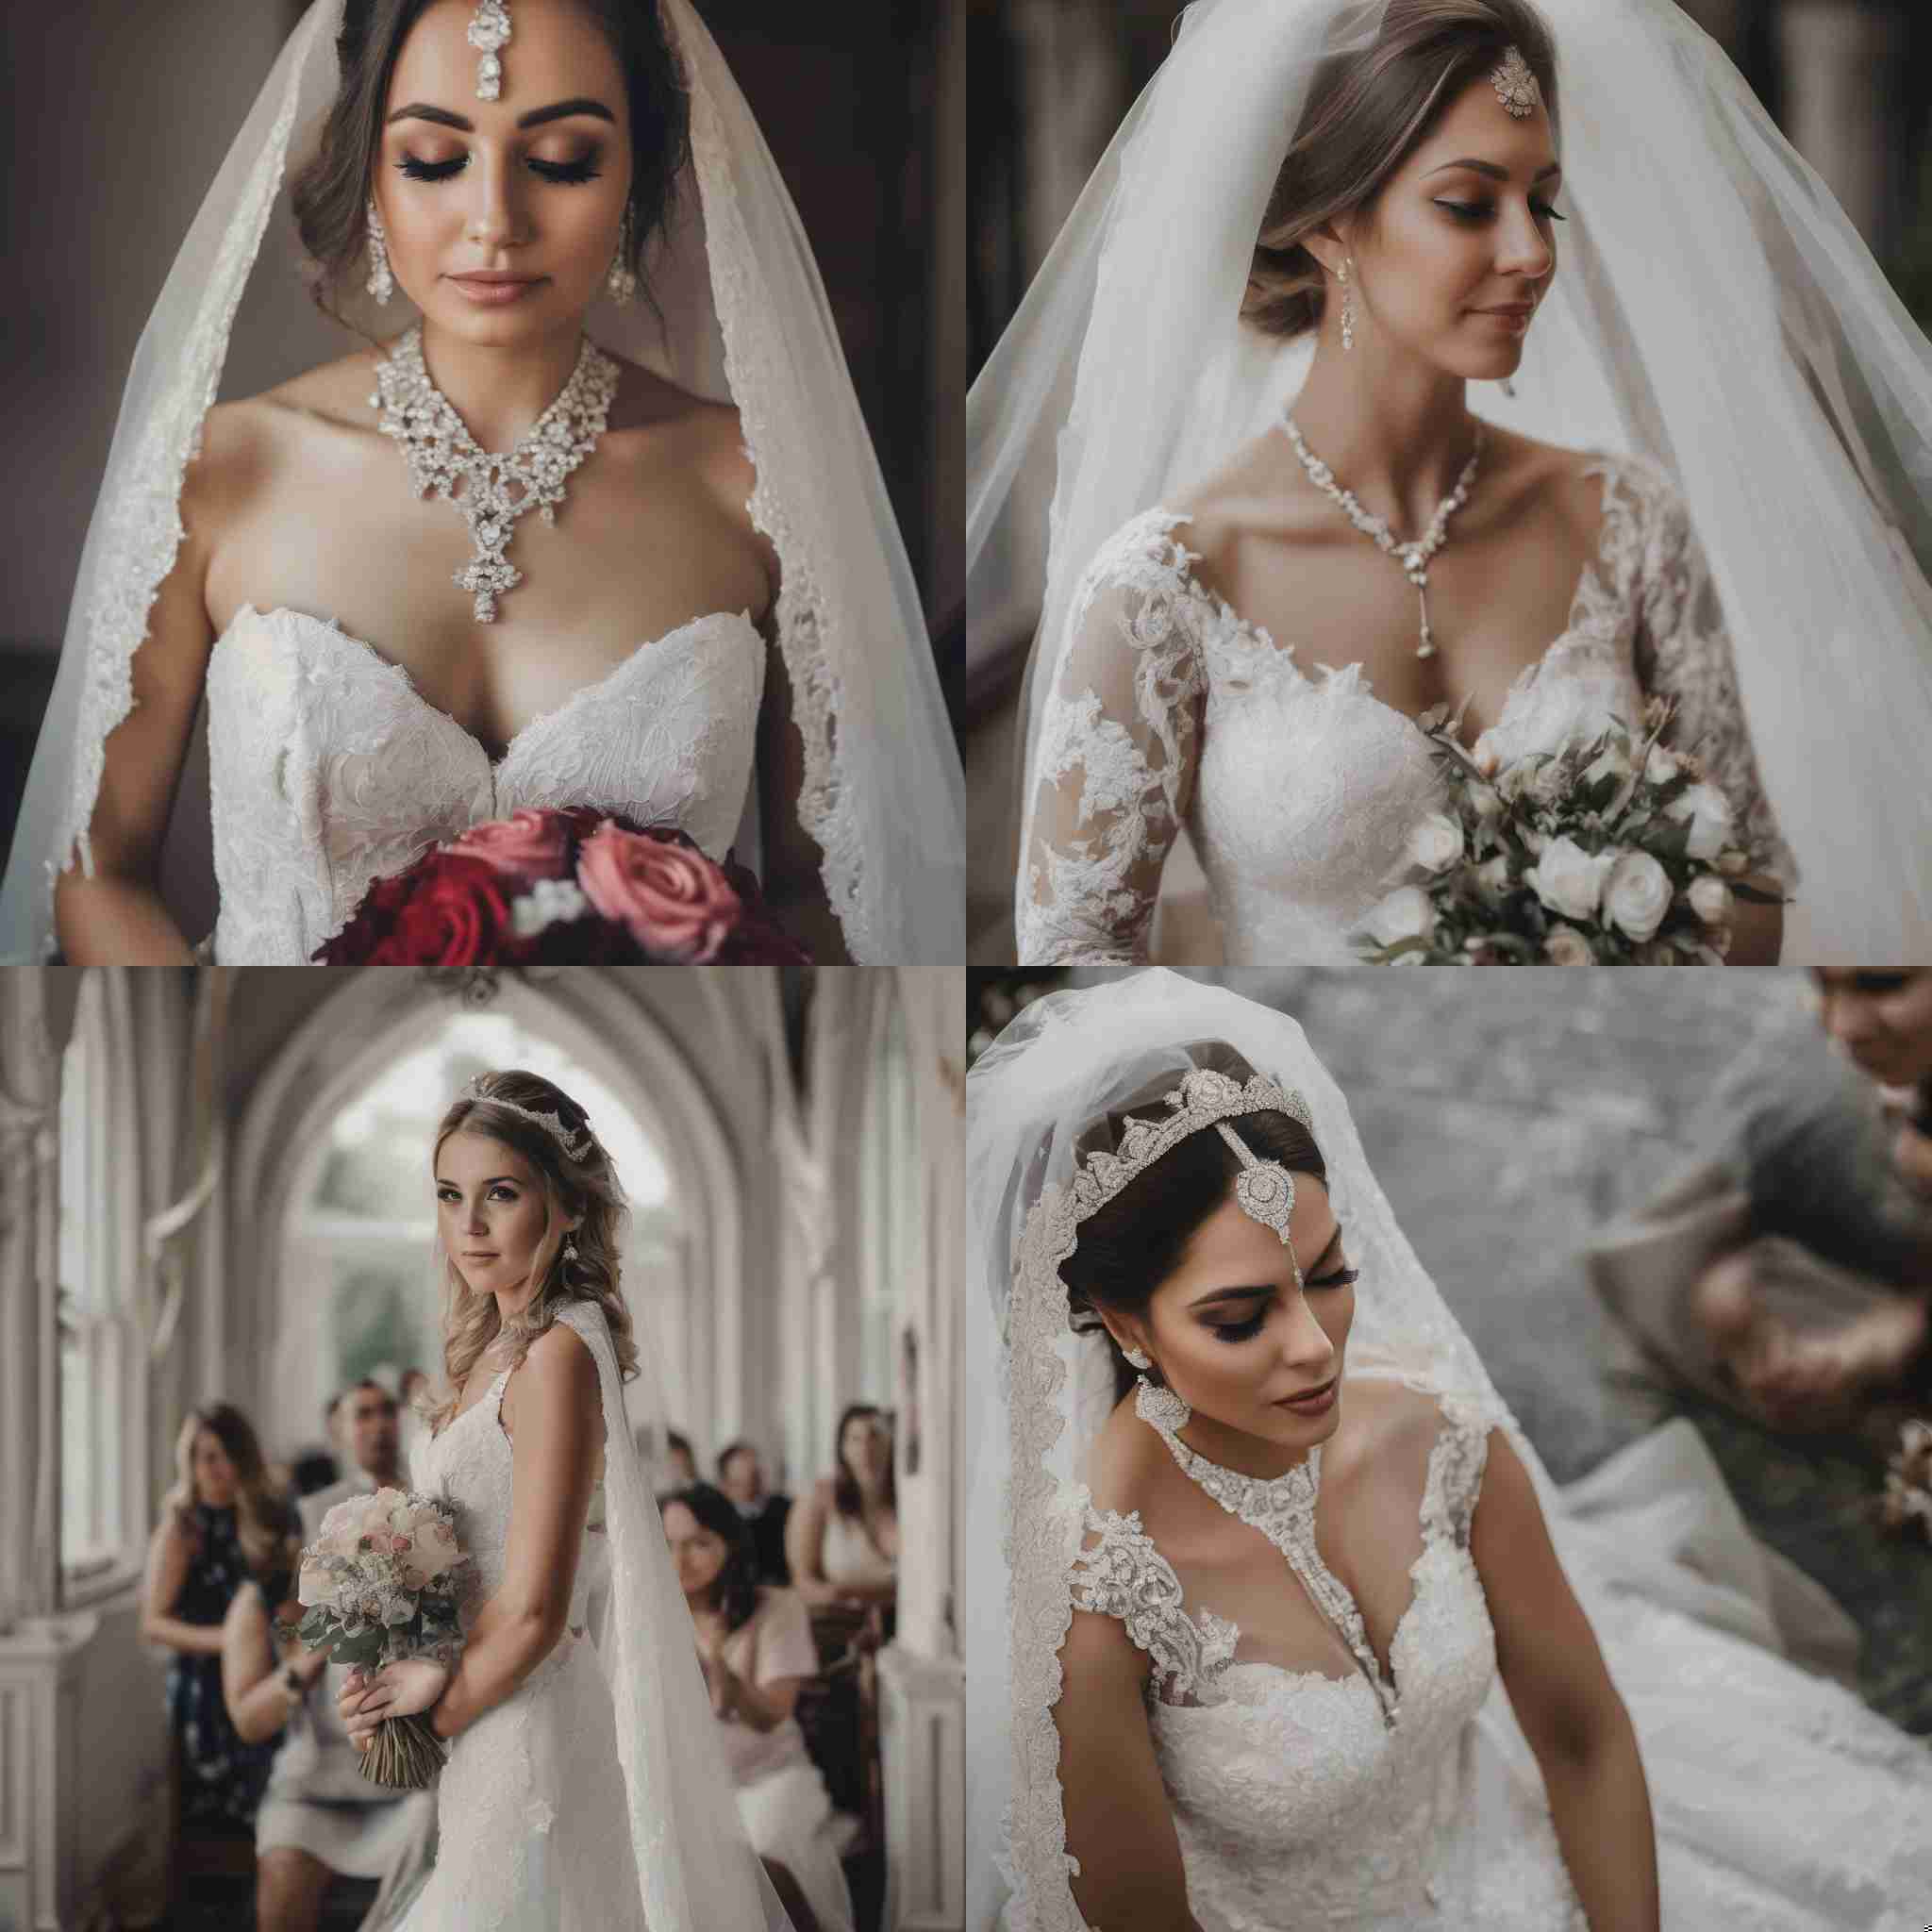 A bride during the wedding